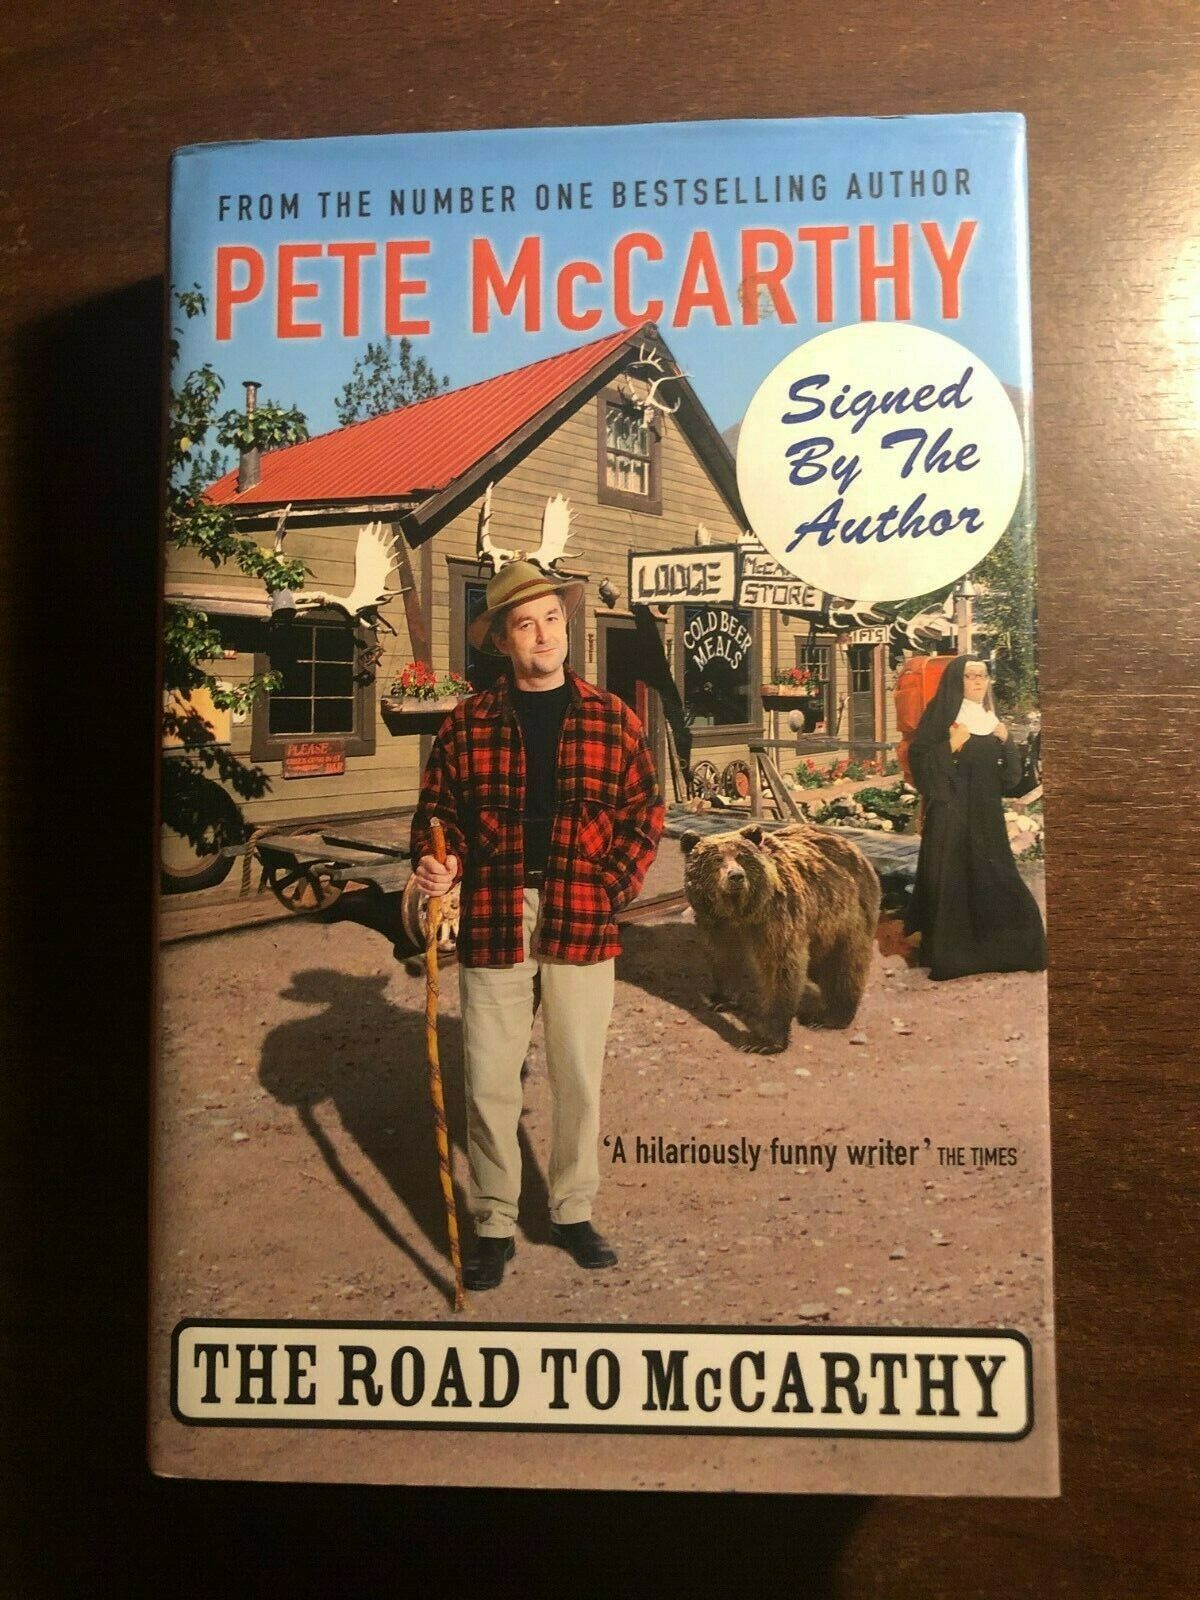 THE ROAD TO MCCARTHY - PETE MCCARTHY